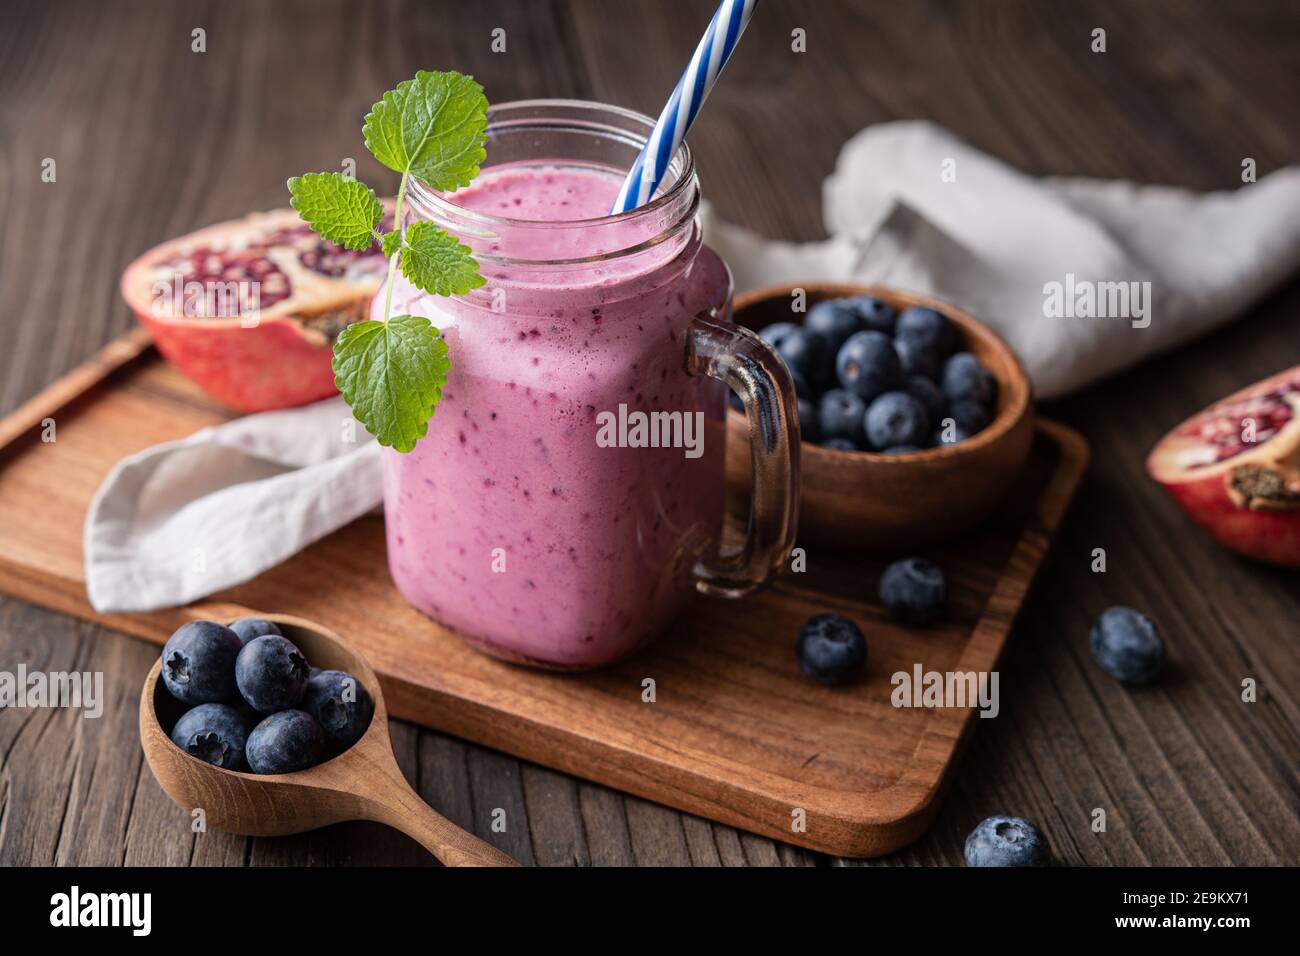 Pomegranate and blueberry smoothie mixed with yogurt and almond milk, served in a glass jar on rustic wooden background Stock Photo